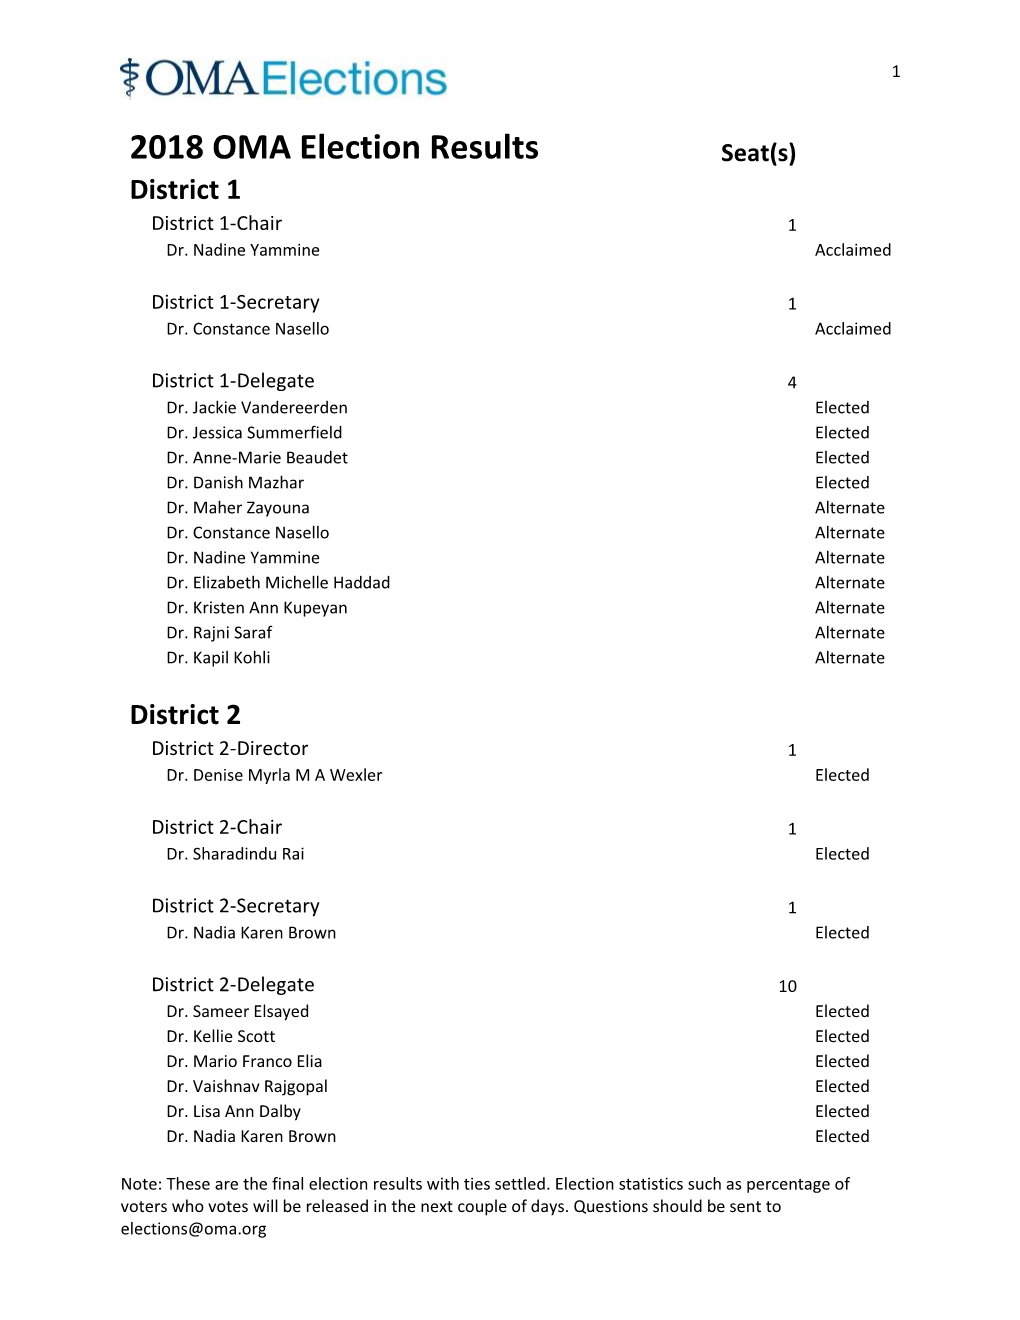 2018 OMA Election Results Seat(S) District 1 District 1-Chair 1 Dr